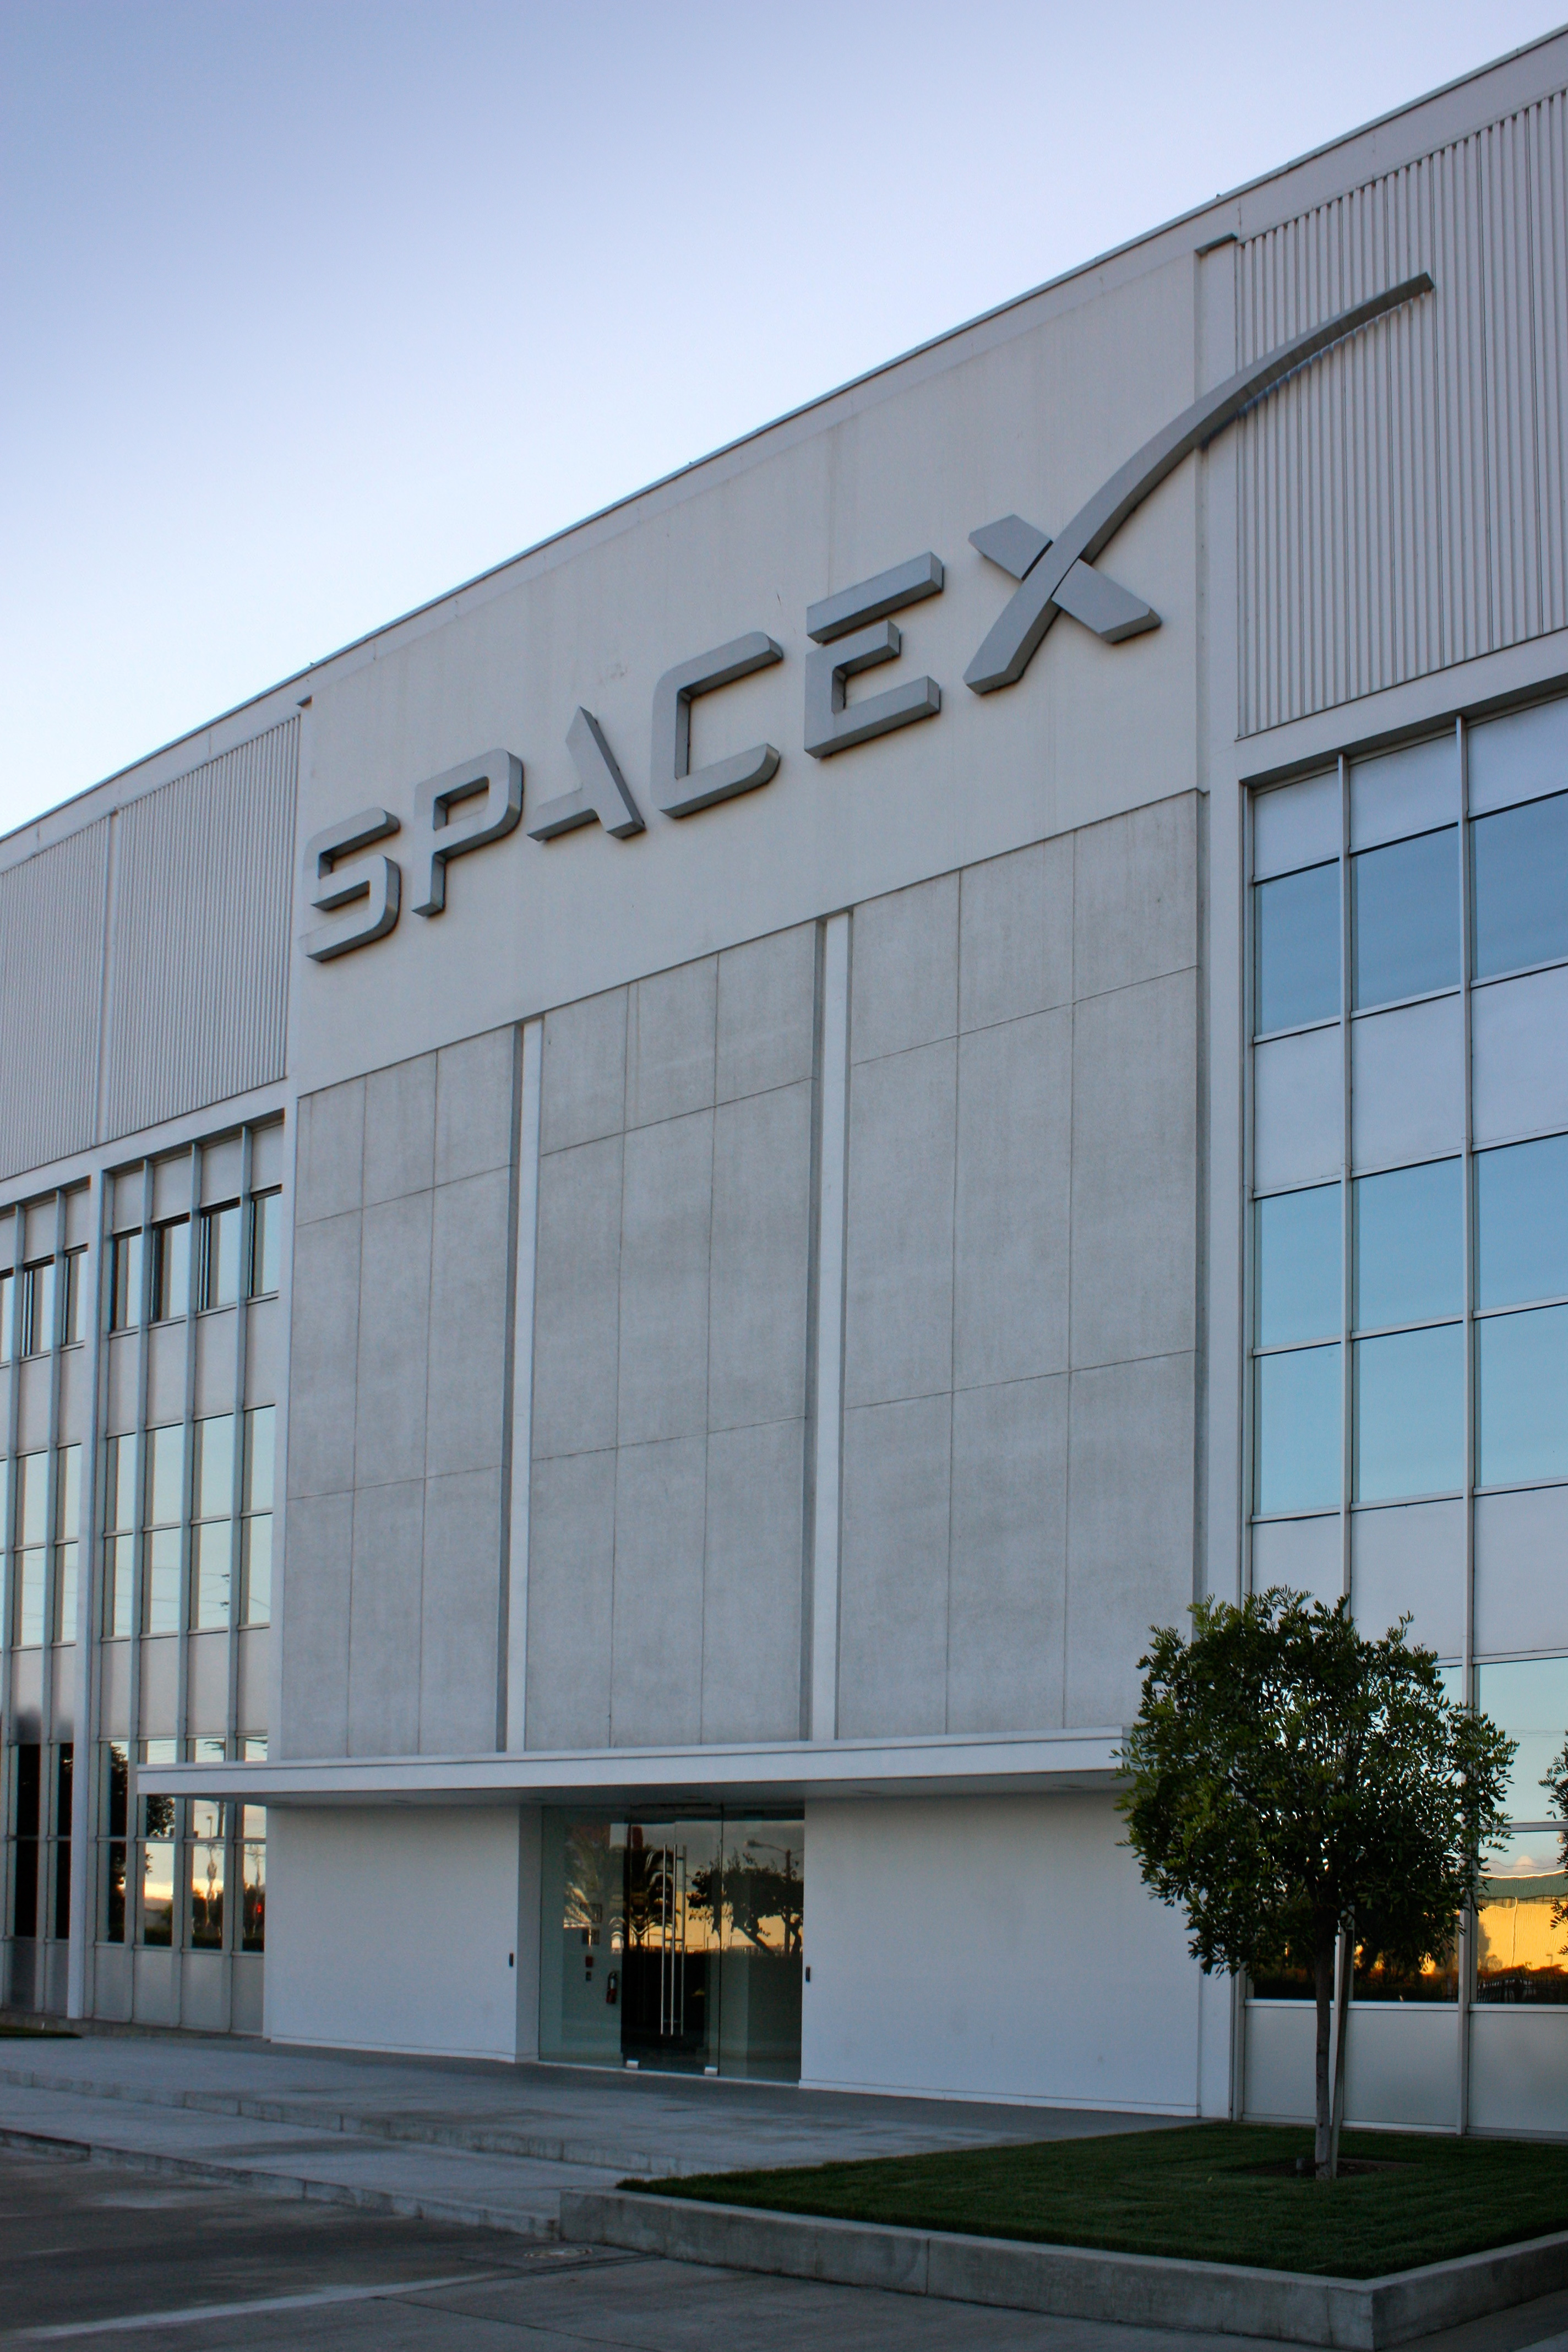 Entrance_to_SpaceX_headquarters.jpg